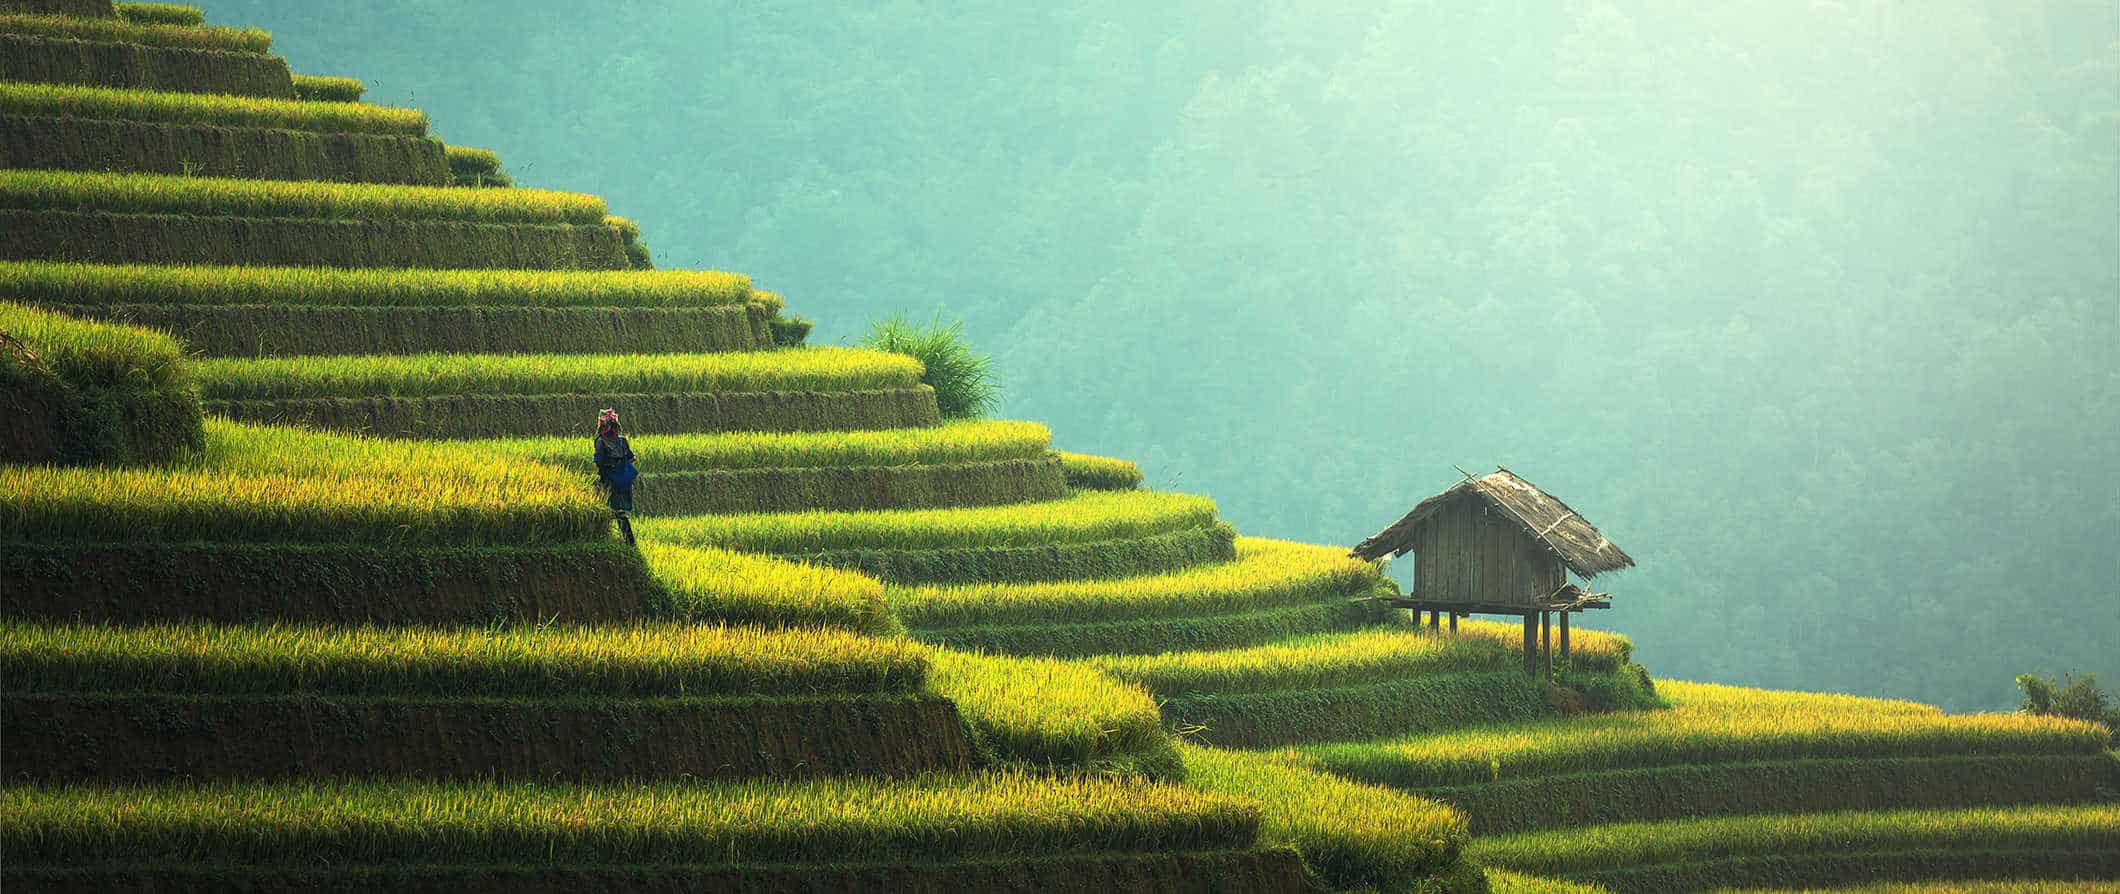 A lone person standing on lush, green rice terraces in Southeast Asia on a bright sunny day